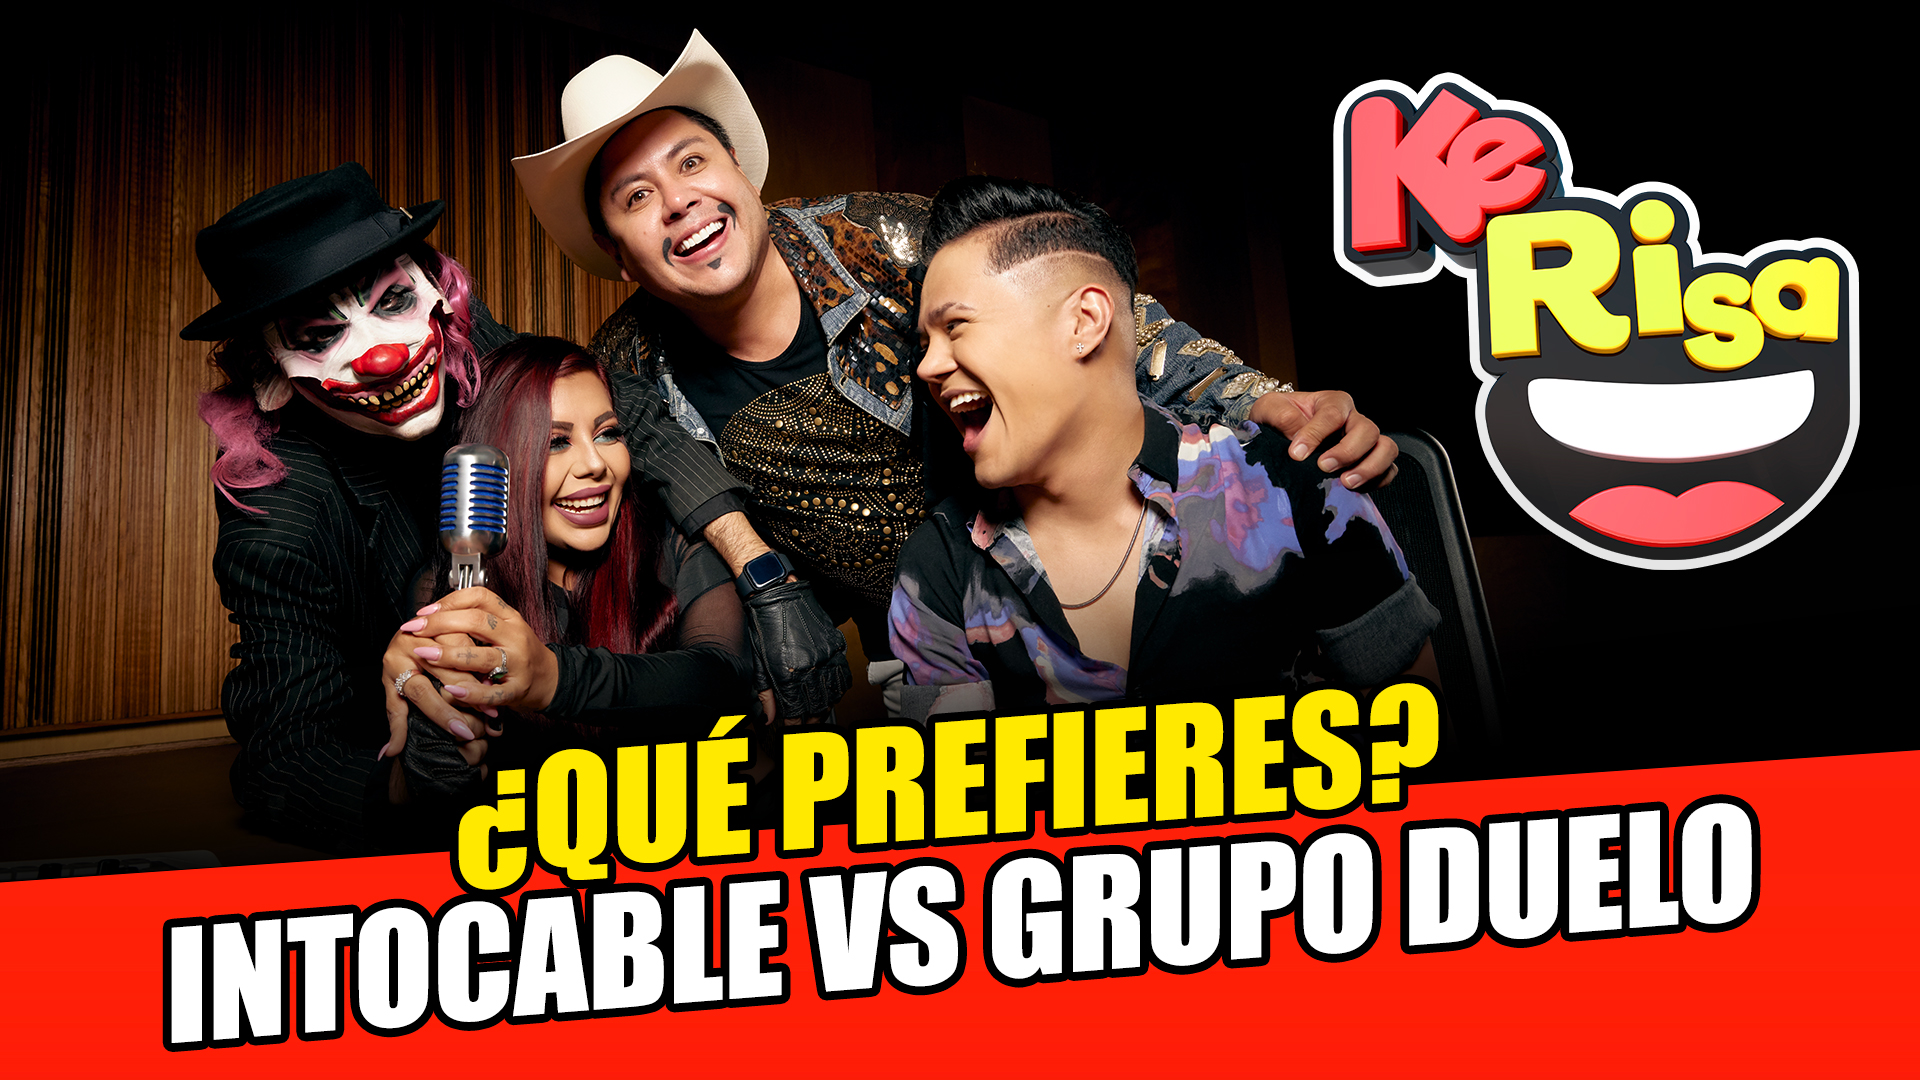 Intocable vs Grupo Duelo.